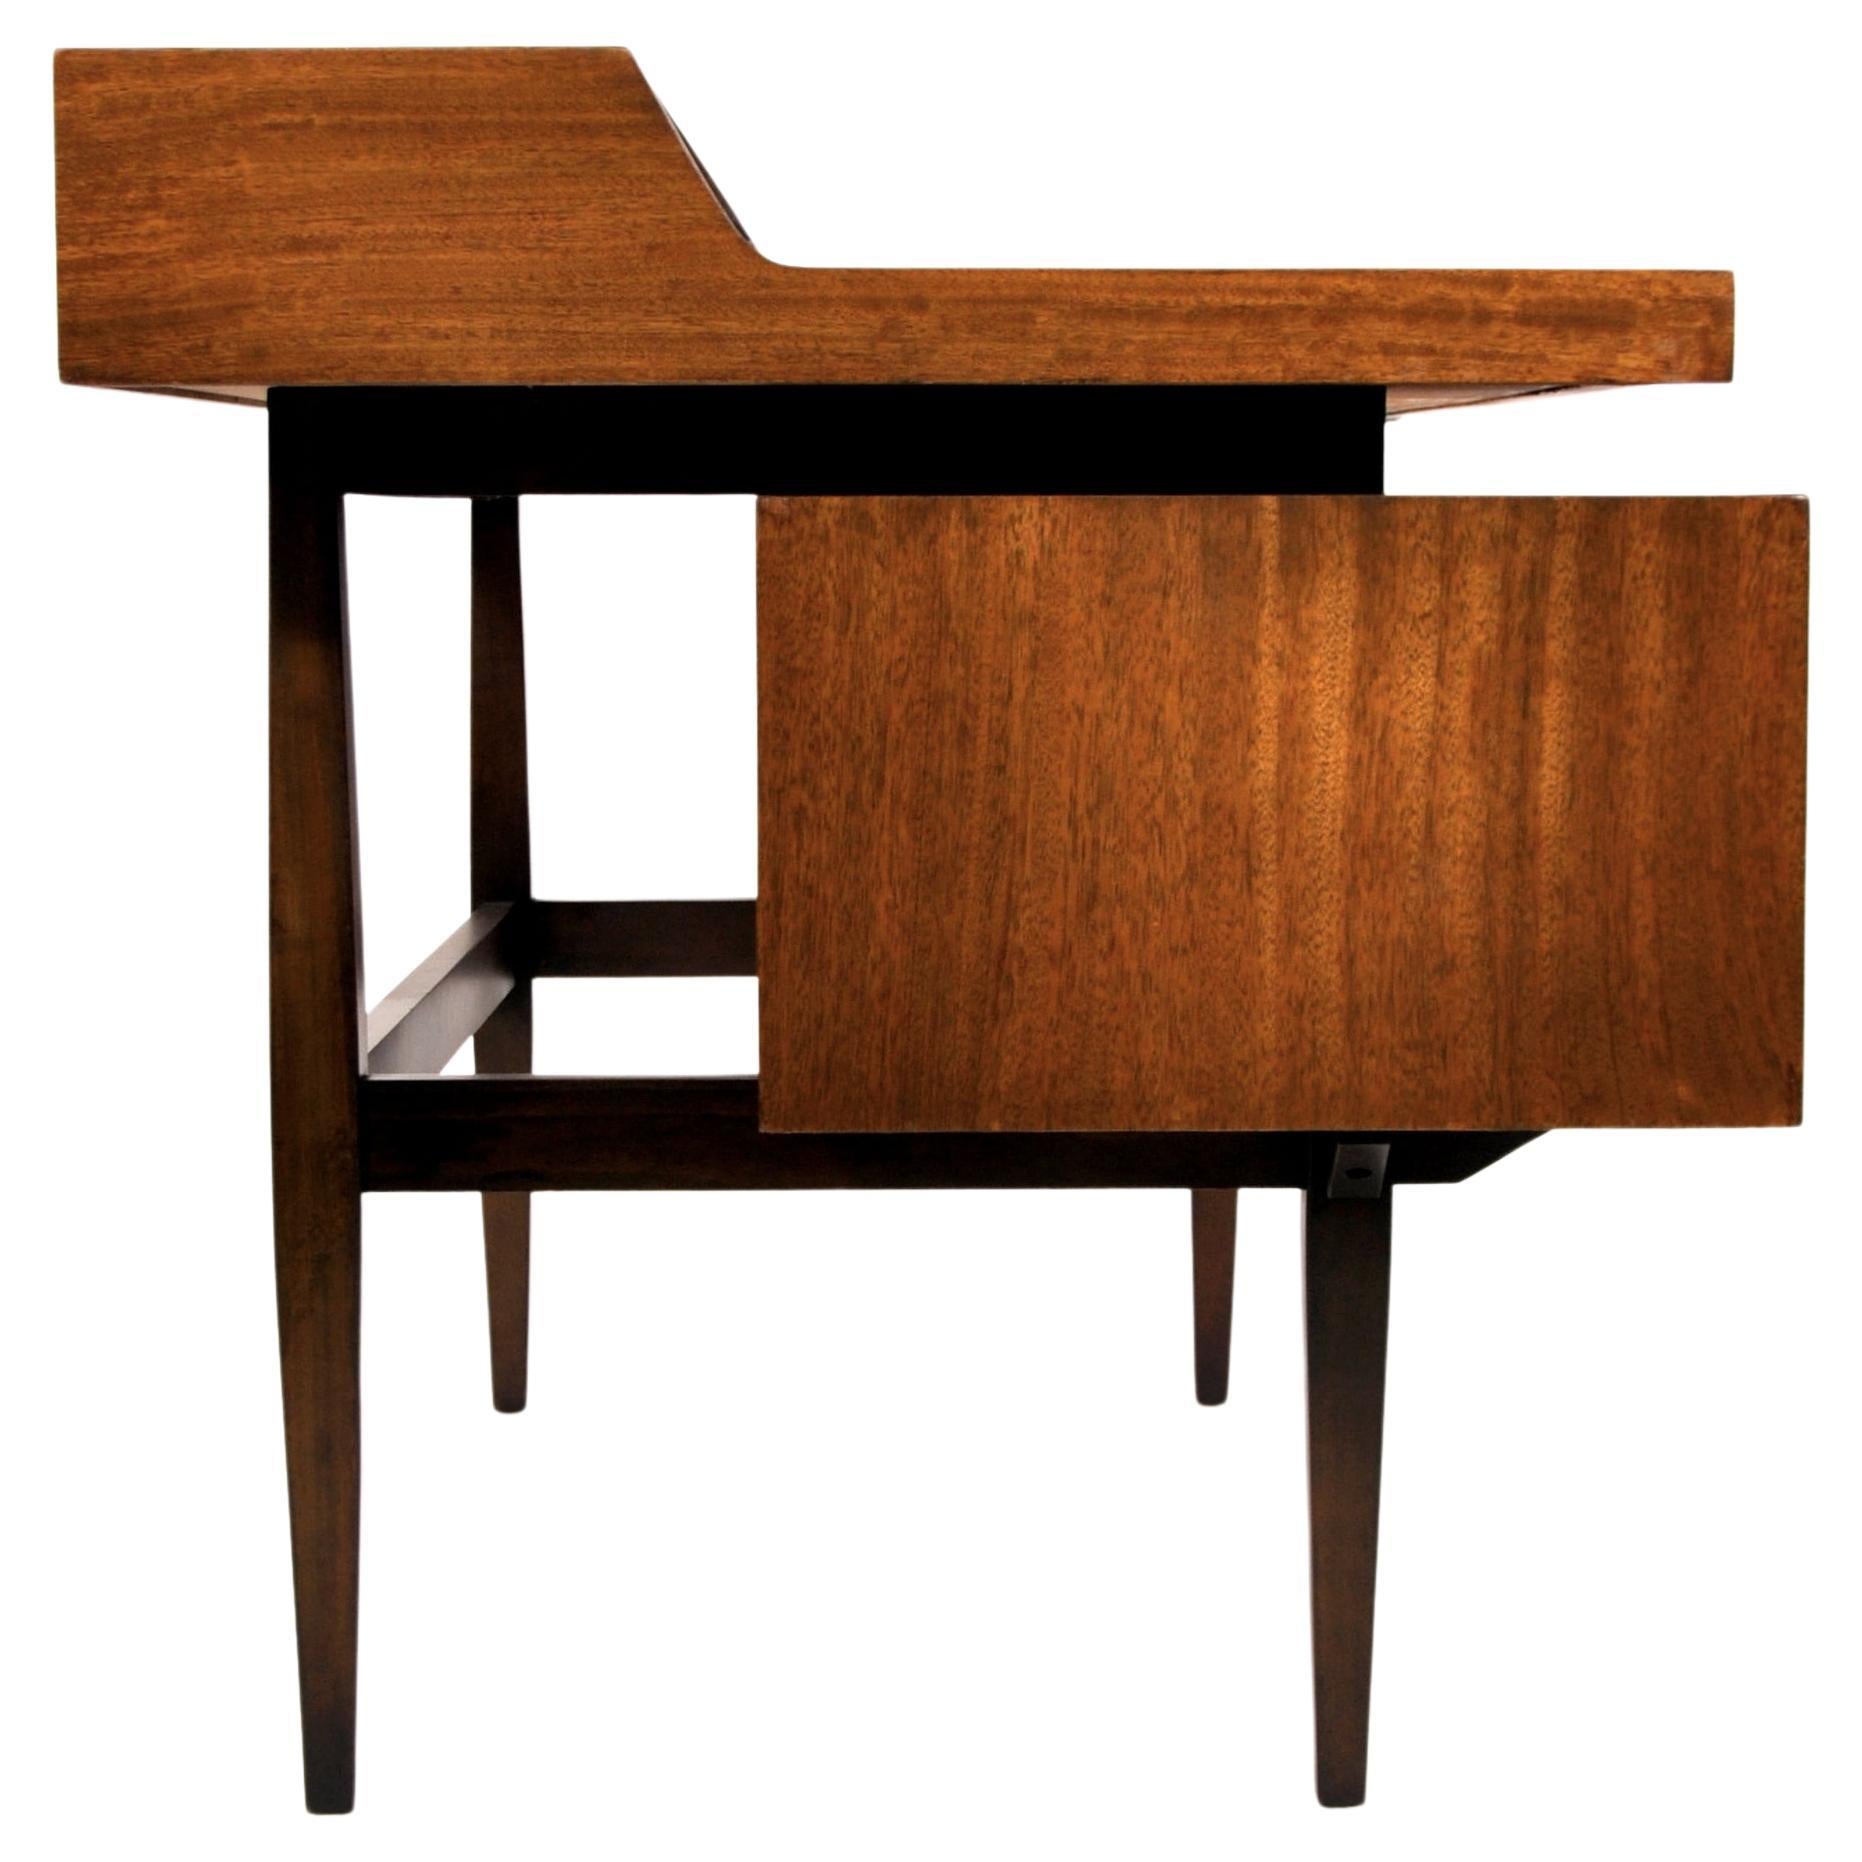 Milo Baughman for Drexel Perspective Mindoro and Leather Desk 1